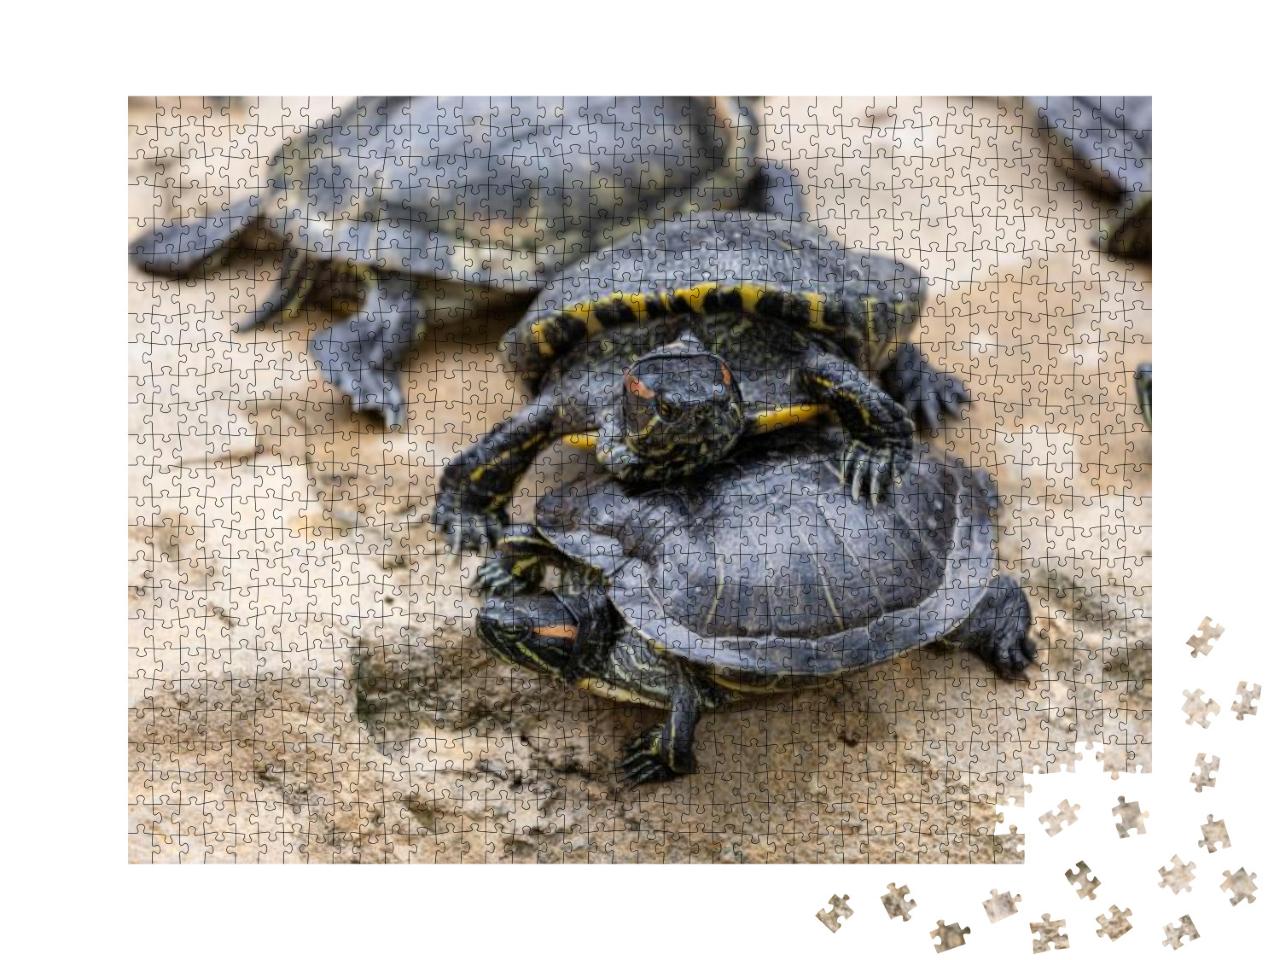 Redear Turtle in Water Pond... Jigsaw Puzzle with 1000 pieces